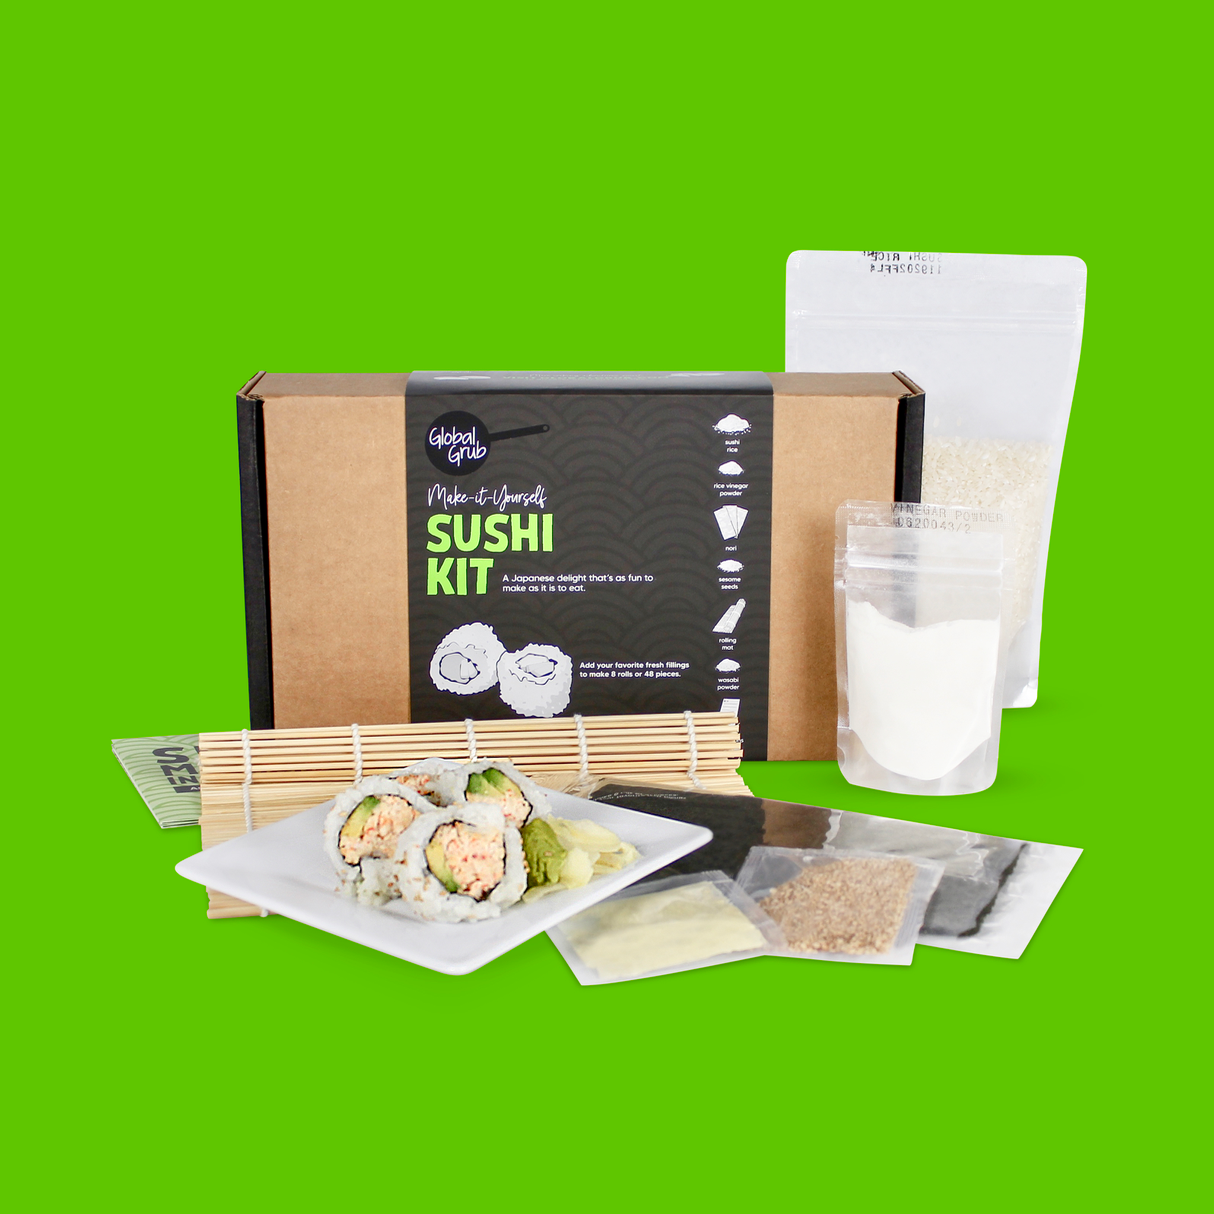 Do it Yourself Gifts: 10 Kits for Foodies